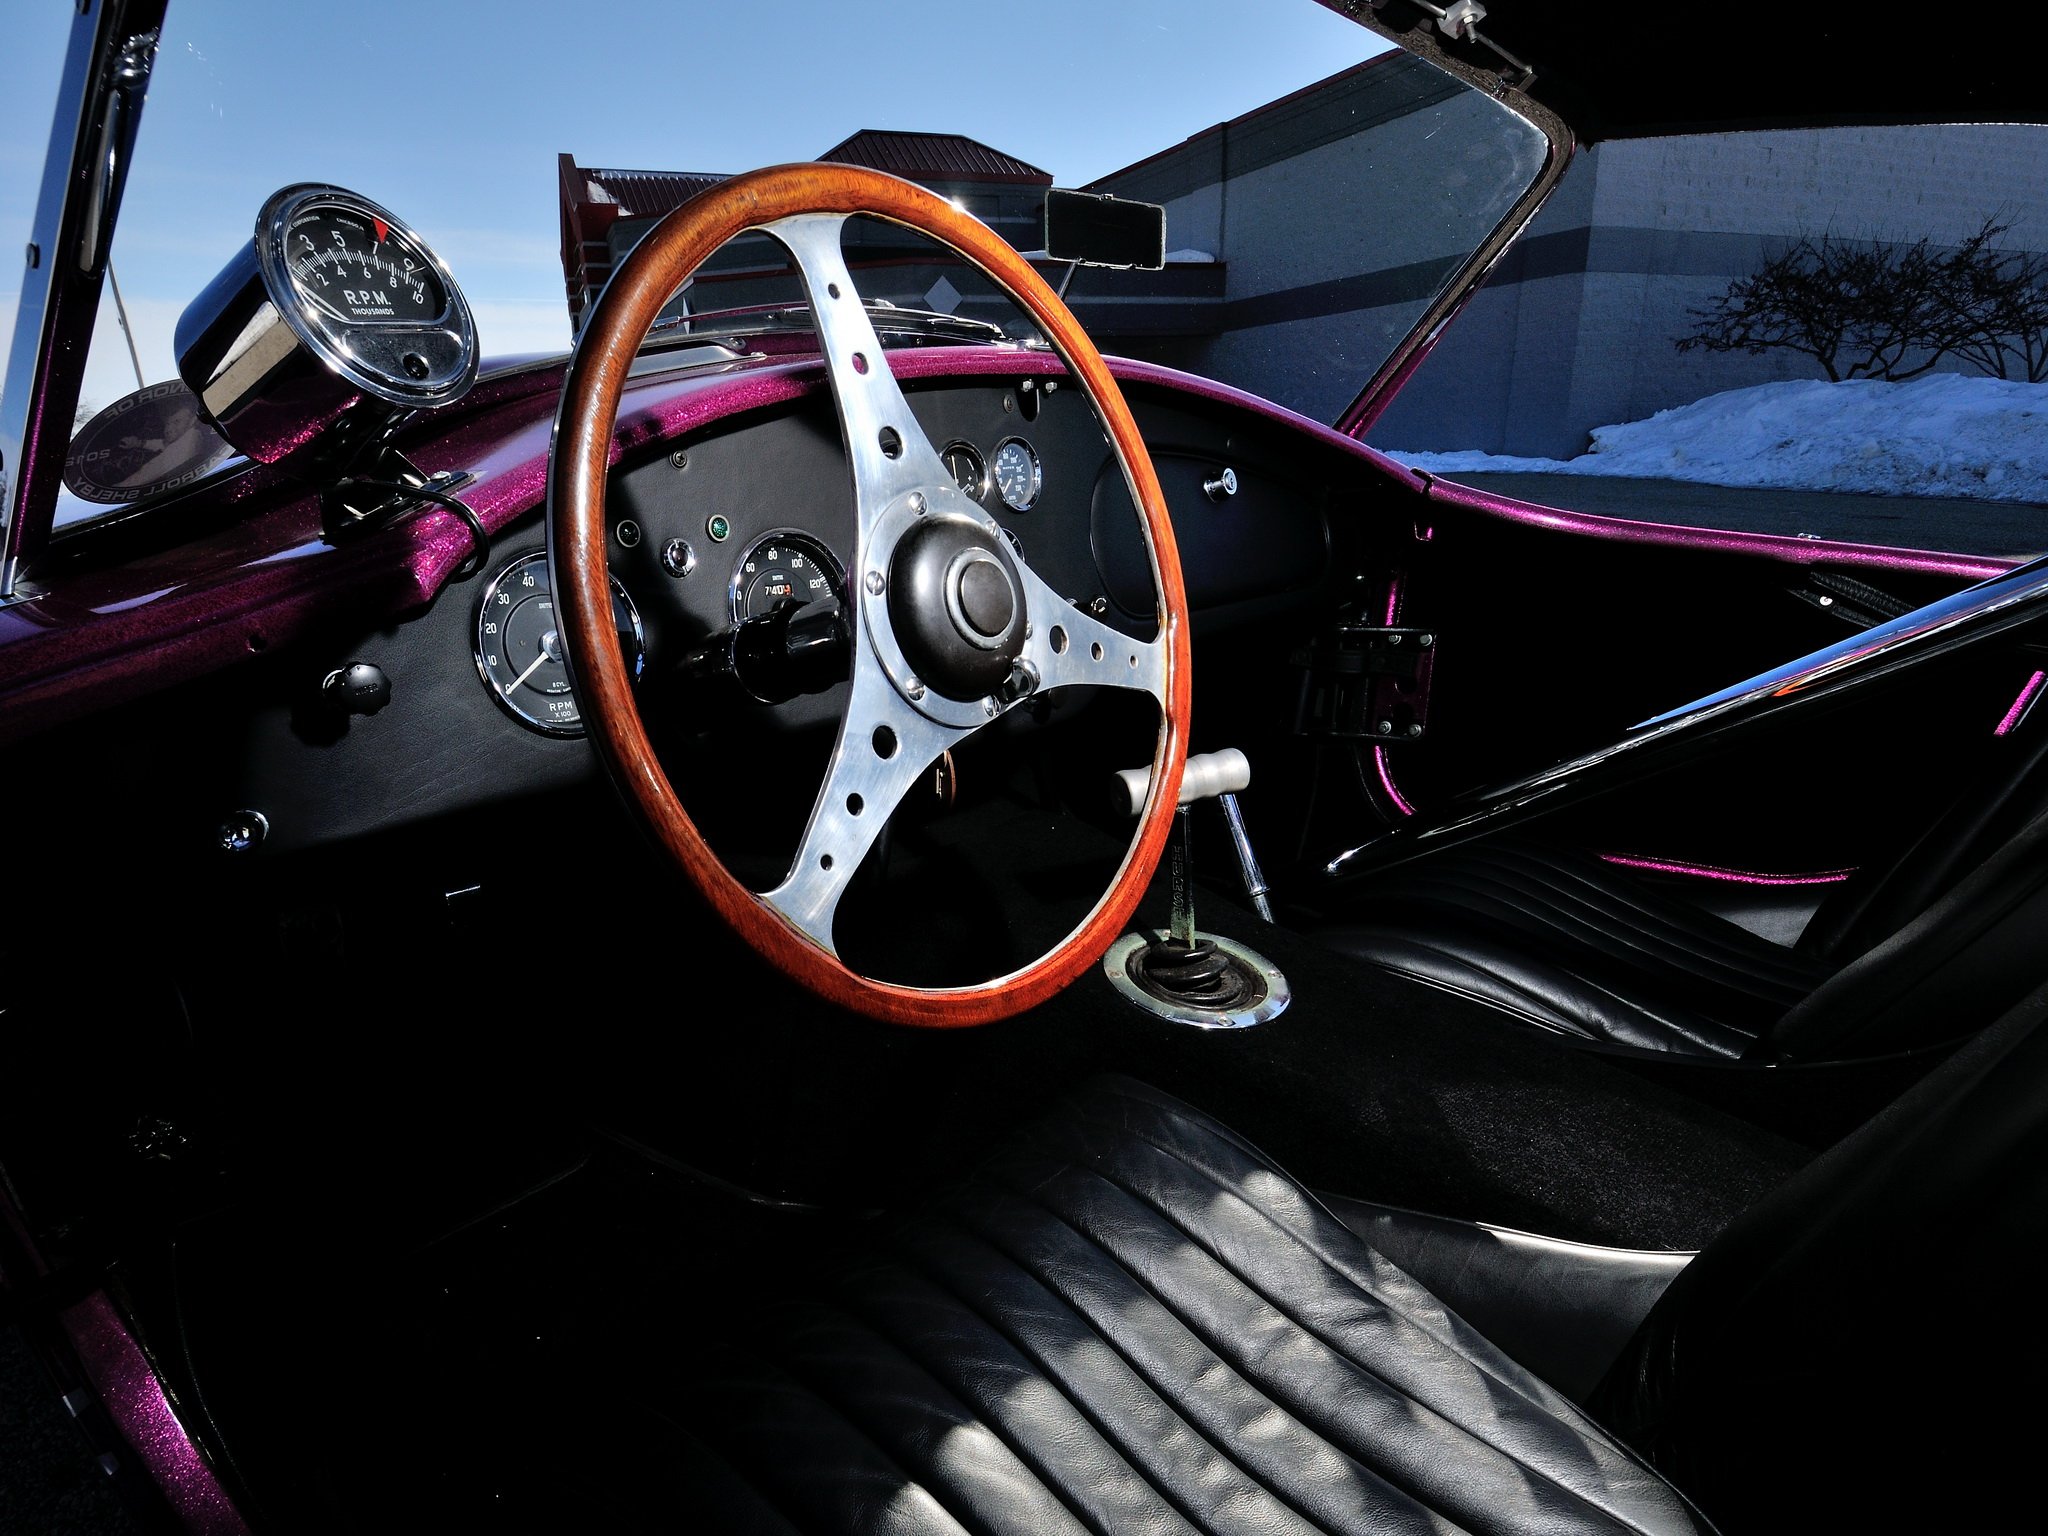 1963, Shelby, Cobra, Coupe, Dragon, Snake, Ford, Drag, Racing, Race, Hot, Rod, Rods, Muscle, Classic, Interior Wallpaper